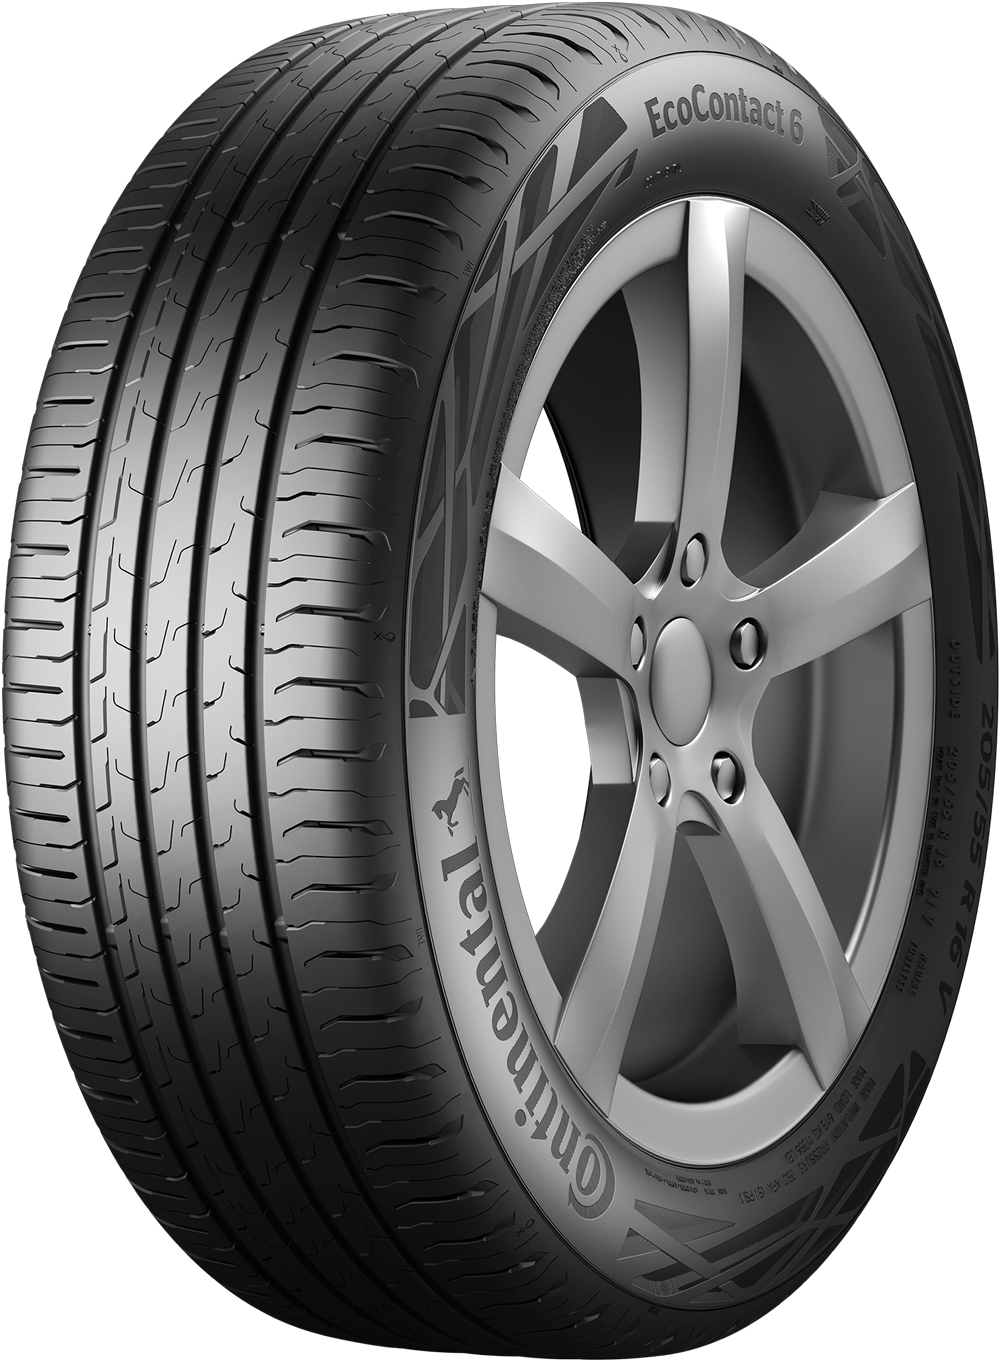 Anvelope auto CONTINENTAL ECO6MO MERCEDES 235/55 R18 100W